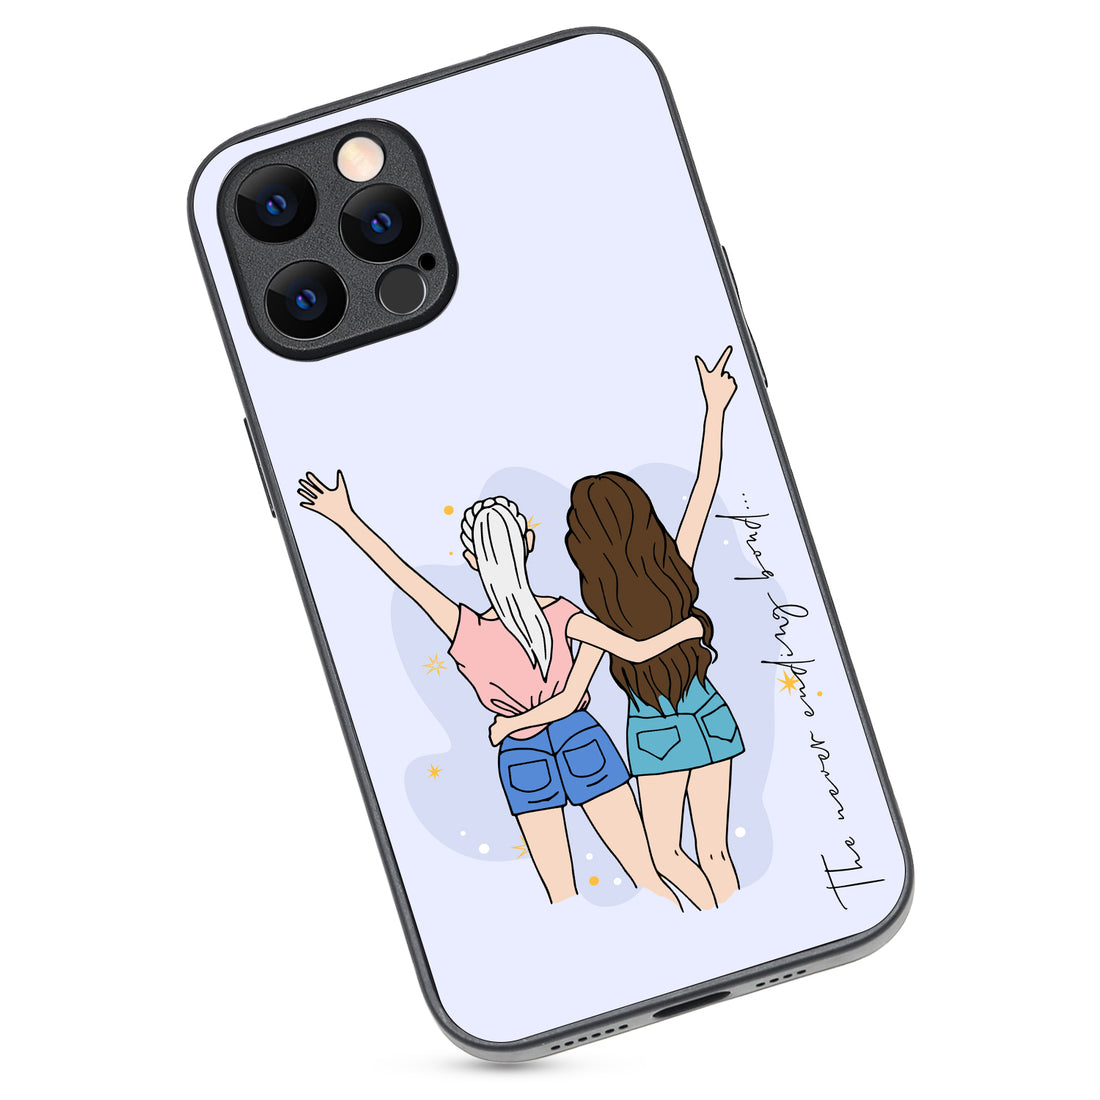 Girl Bff iPhone 12 Pro Max Case